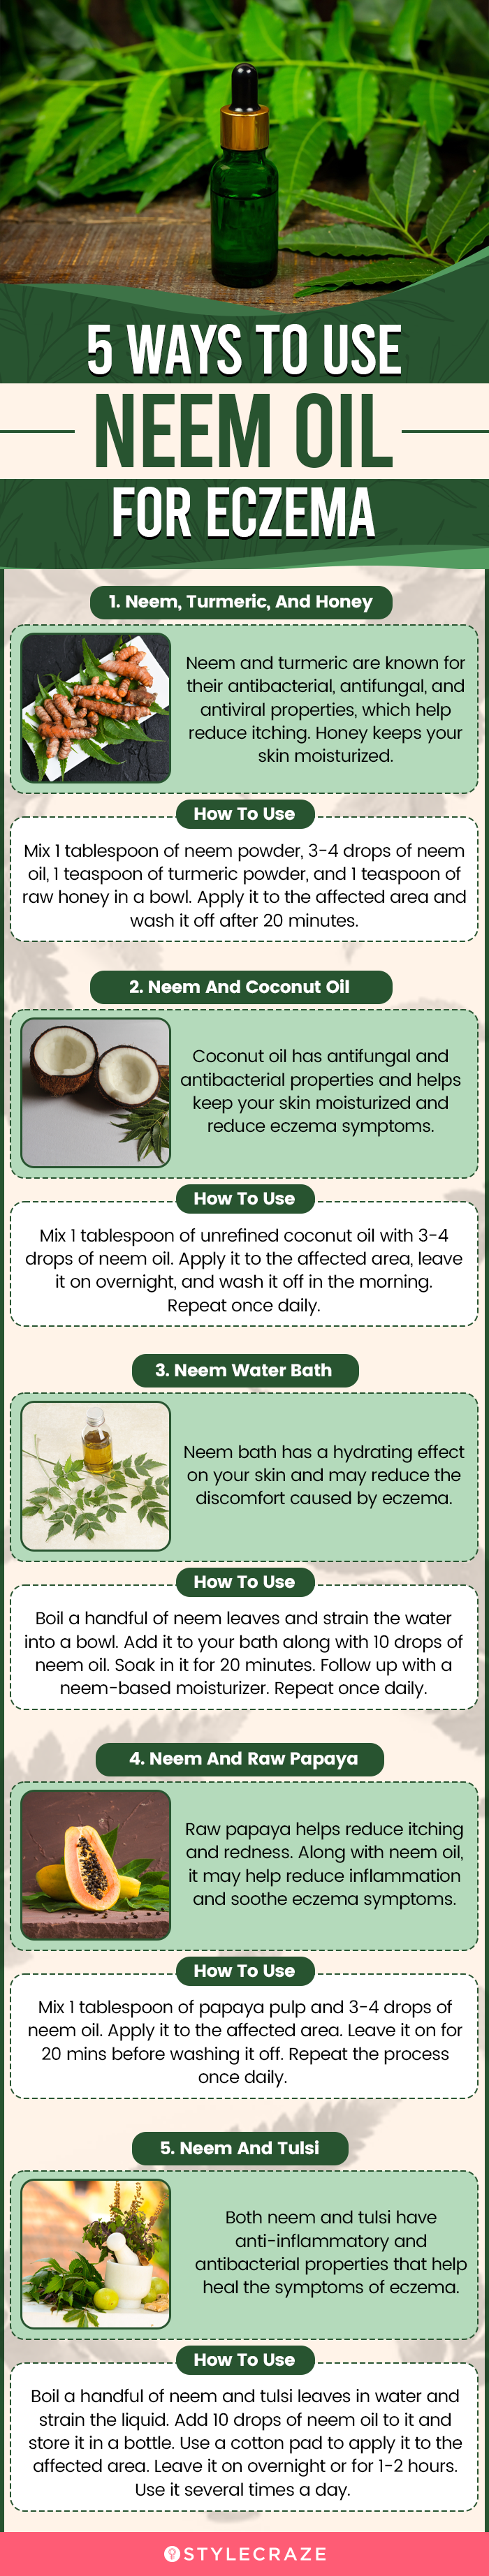 5 ways to use neem oil for eczema (infographic)